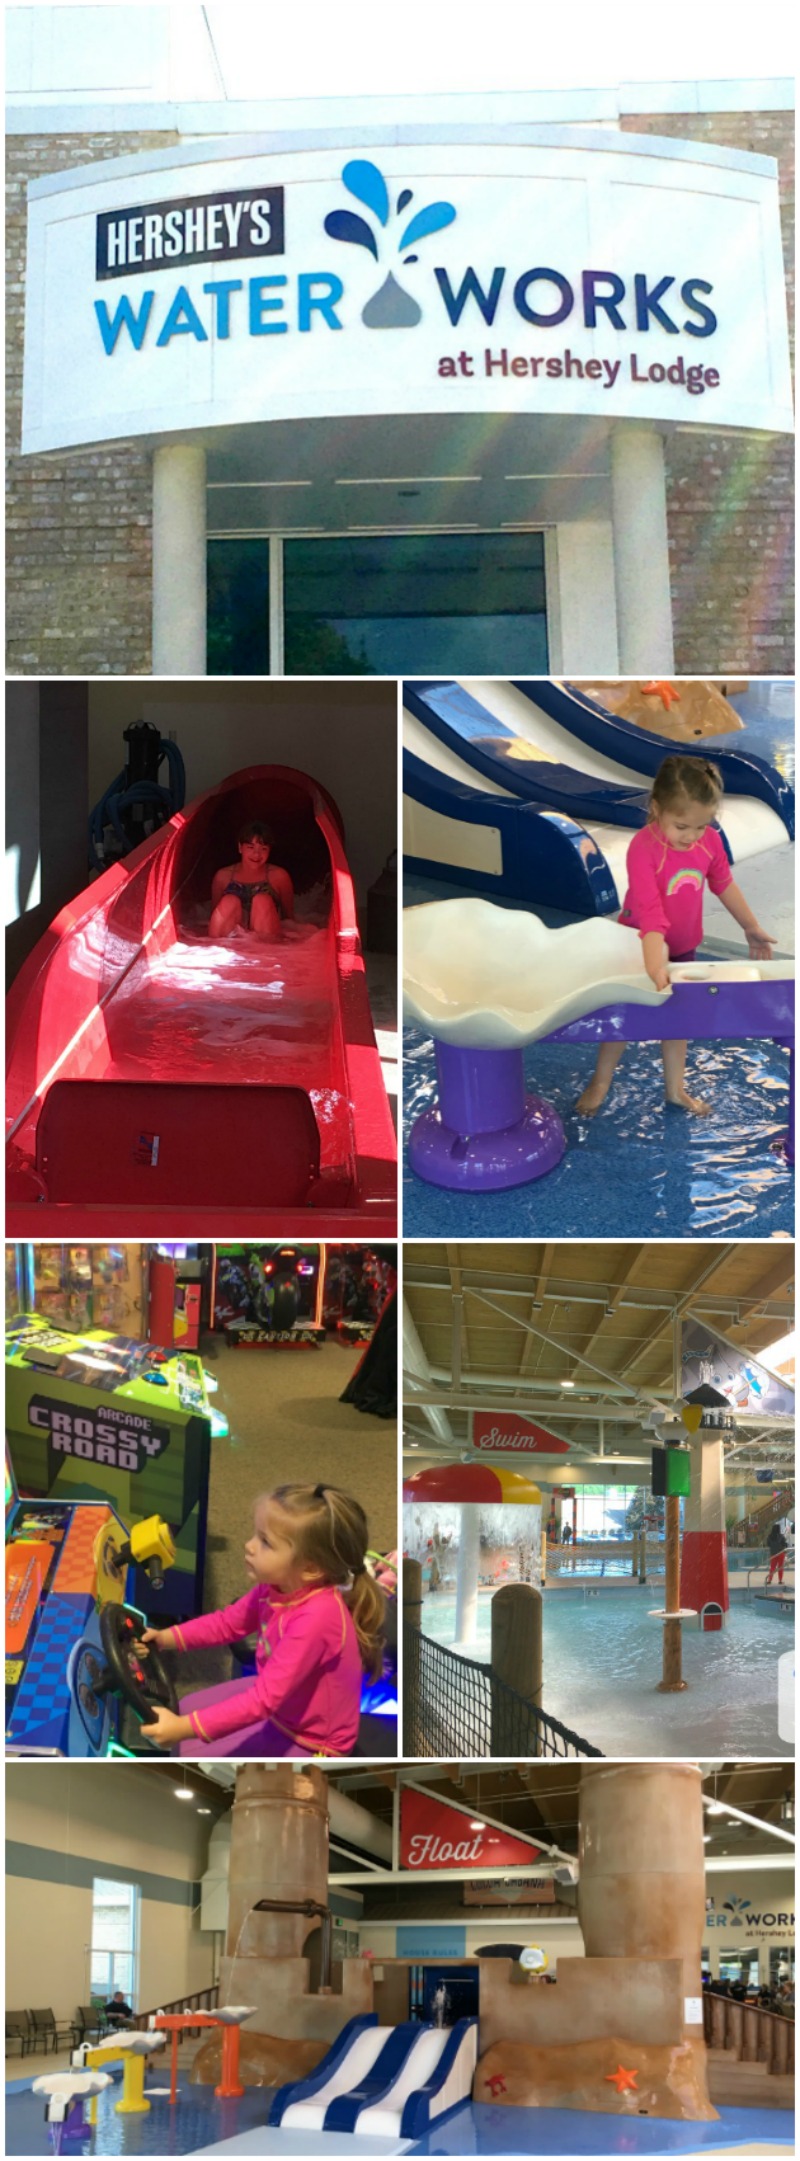 The Hershey Waterworks at the Hershey Lodge is fun for the entire family!